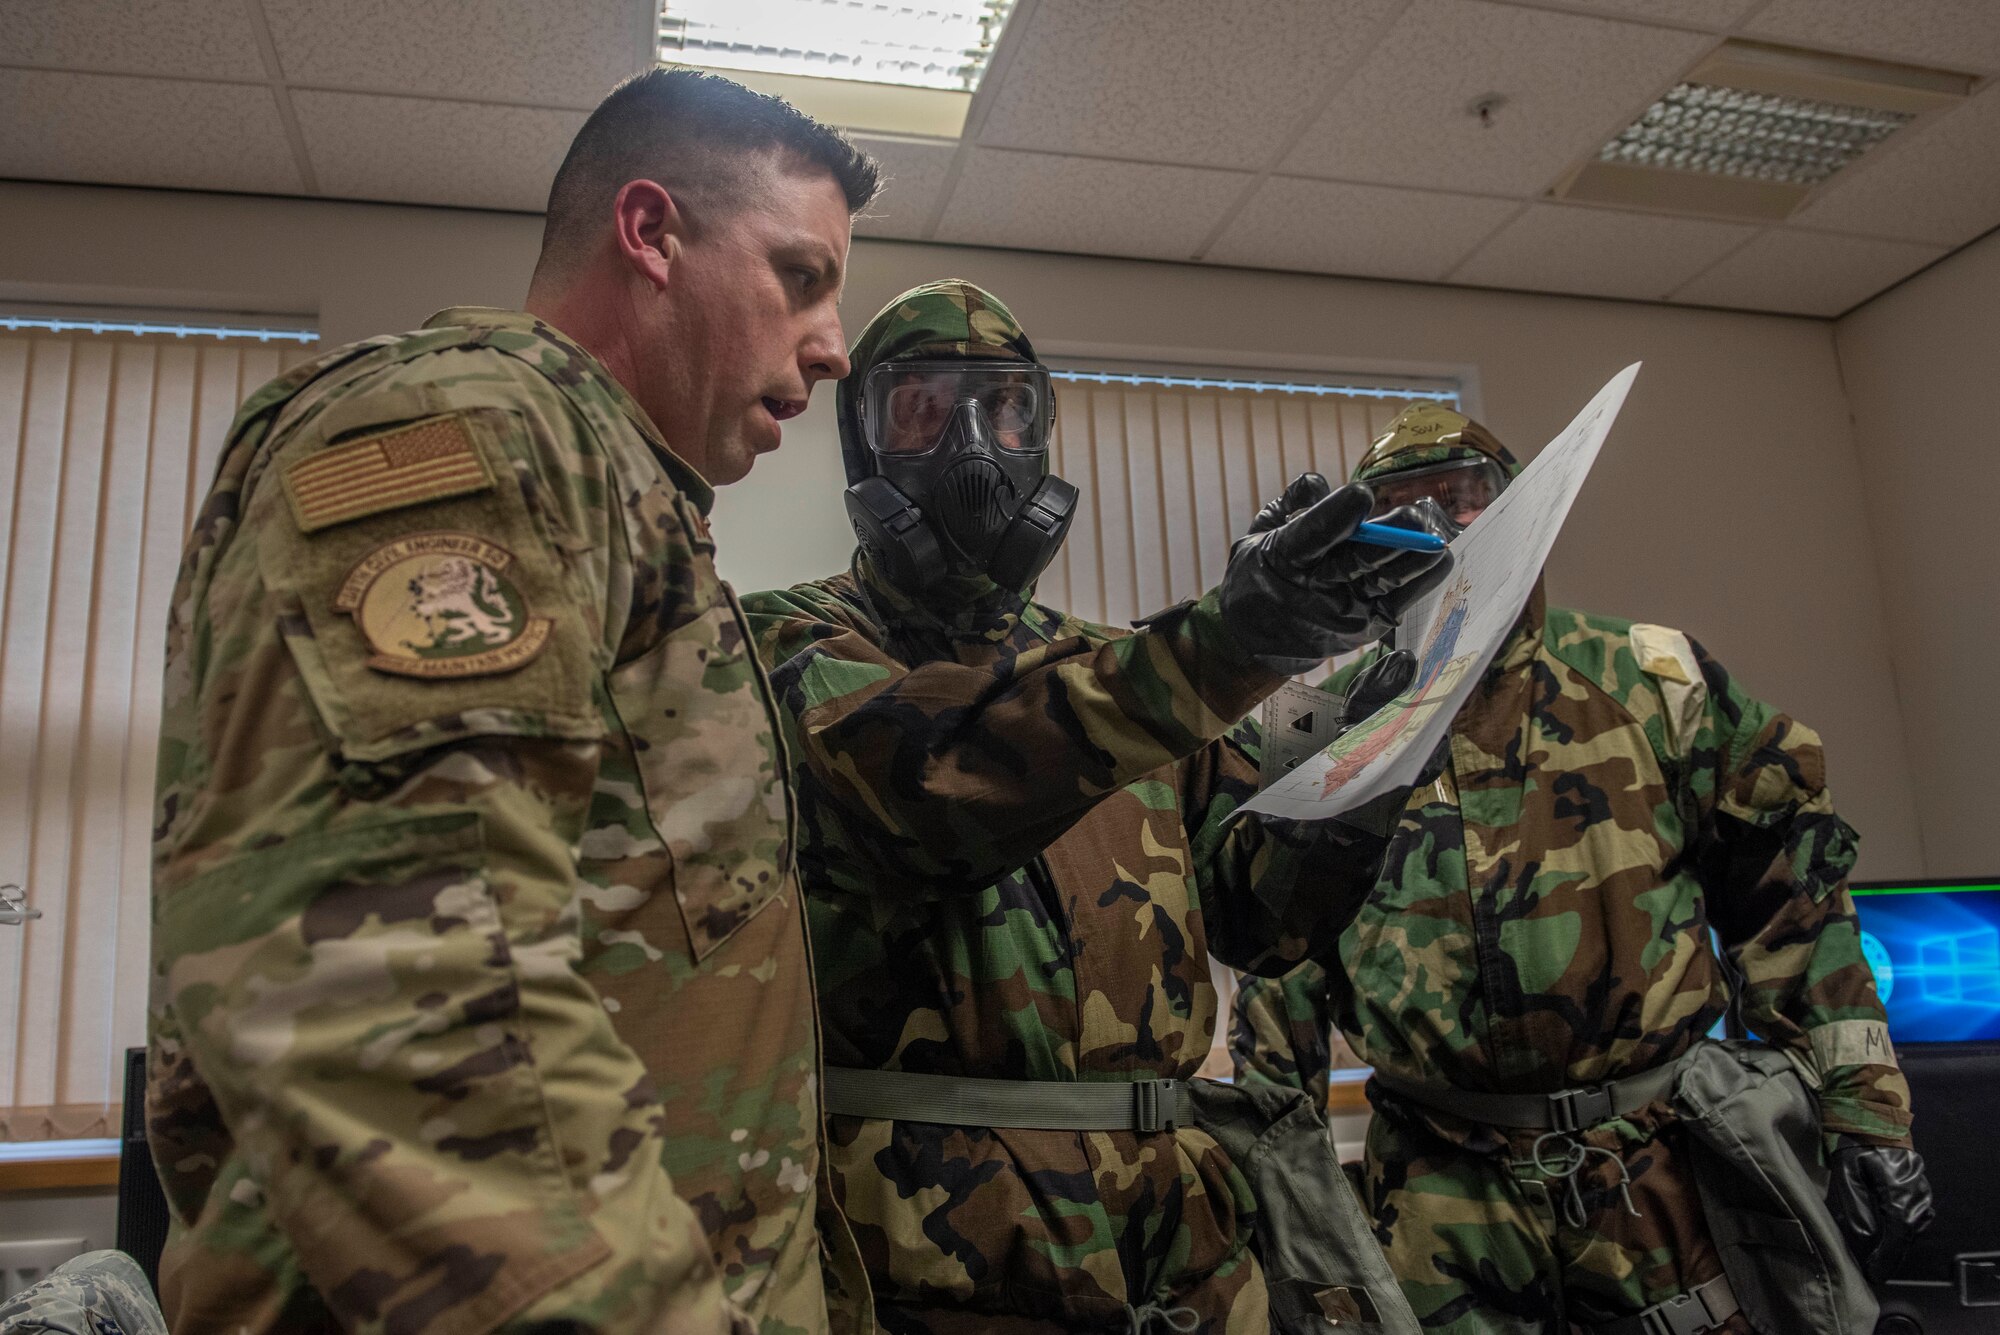 Master Sgt. James McGarvey, 100th Civil Engineer Squadron emergency management section chief, discusses chemical, biological, radiological, nuclear and explosive procedures during a readiness exercise at RAF Mildenhall, England, Feb. 10, 2020. The main purpose of the exercise was to demonstrate how rapidly Bloody Hundredth Airmen are able to organize an entire wing and deal with simulated real-world scenarios. (U.S. Air Force photo by Staff Sgt. Luke Milano)